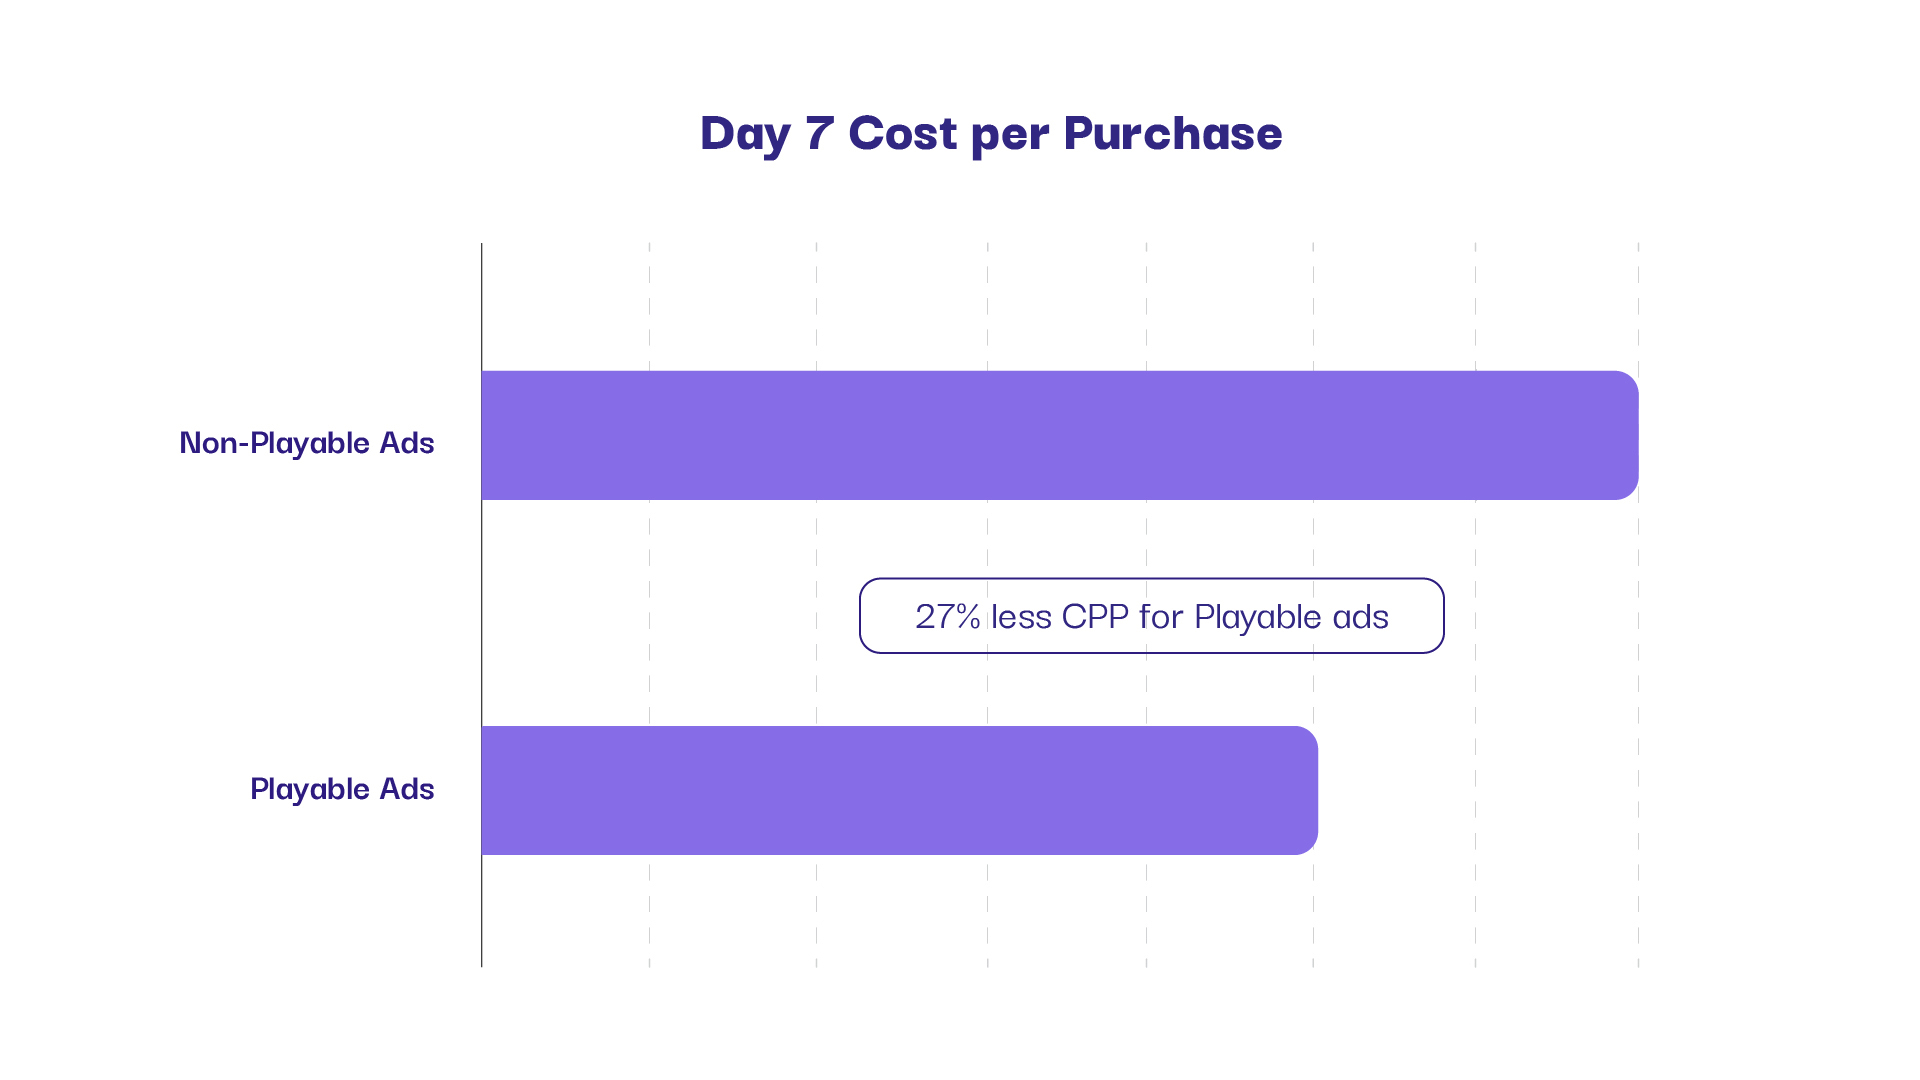 Creative excellence: How we increased Purchase volumes & lowered CPP